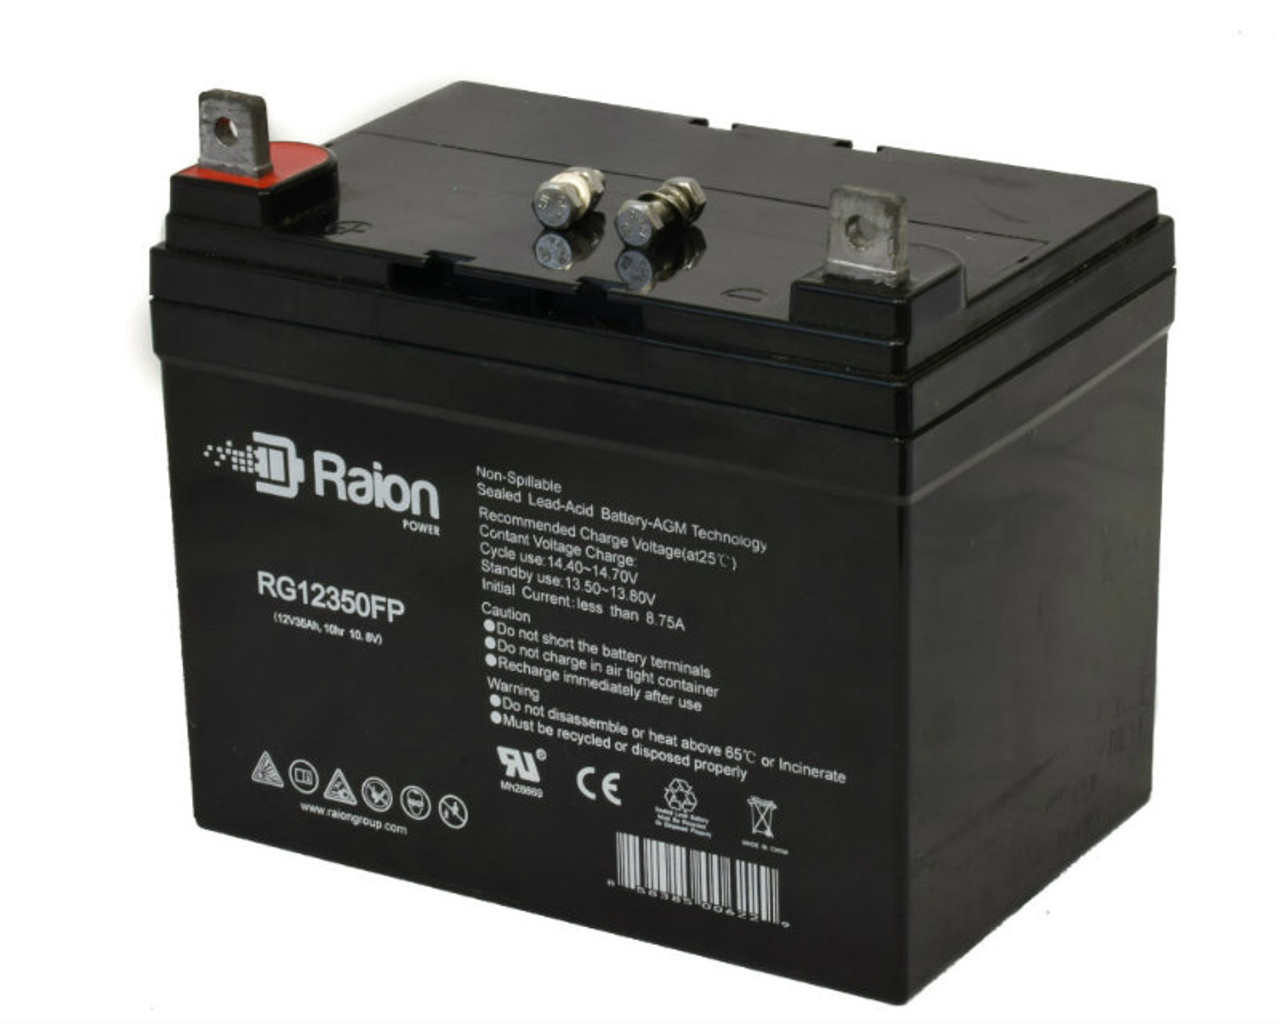 Raion Power Replacement 12V 35Ah RG12350FP Battery for Ariens Gravely ZOOM 2050